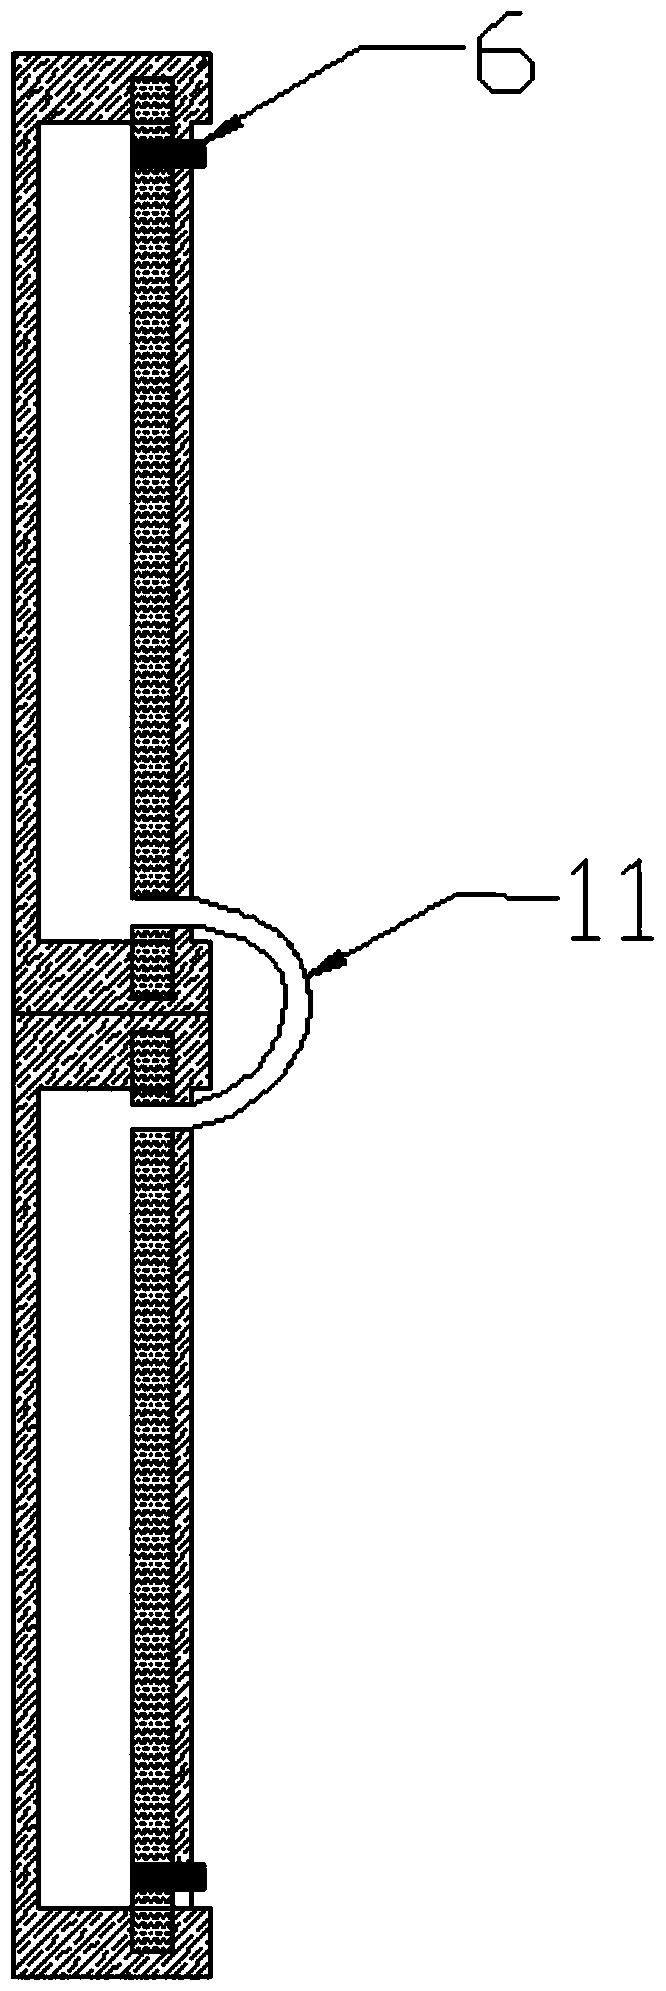 A method for preventing concrete temperature cracks in underground side wall structures